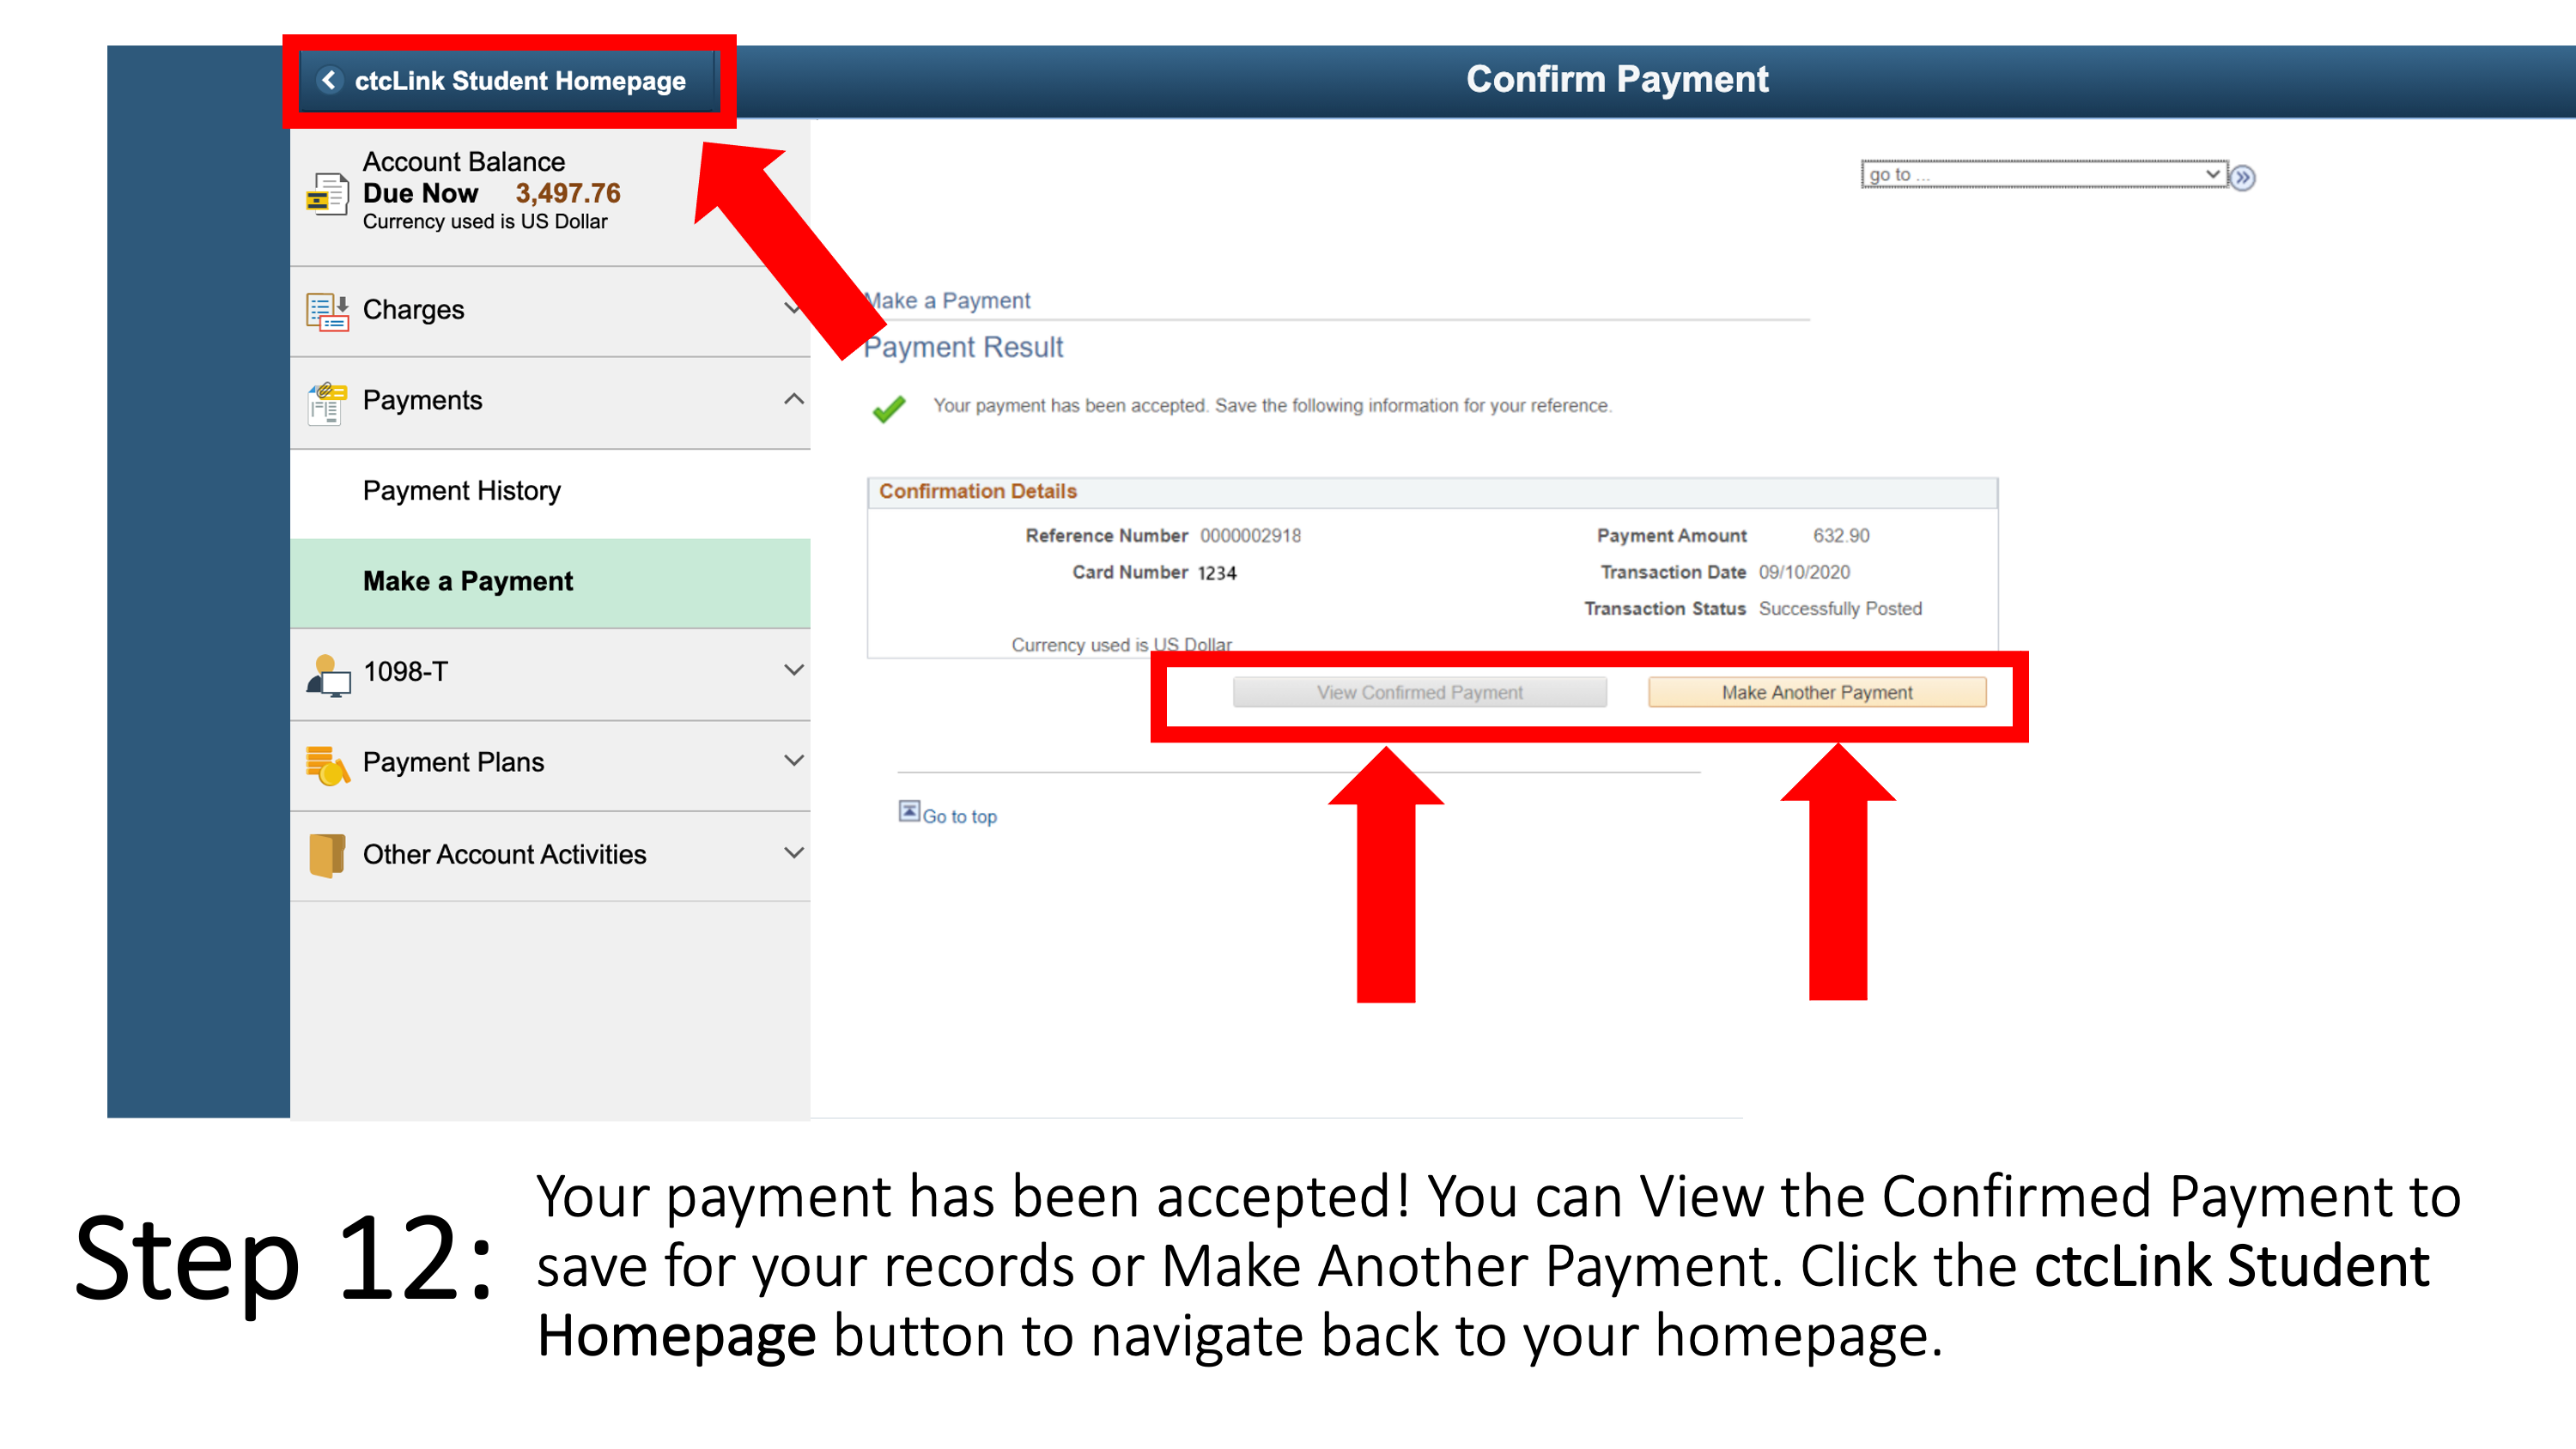 Your payment has been accepted! You can “View the Confirmed Payment” to save for your records or “Make Another Payment”. Click the ctcLink Student Homepage button to navigate back to your homepage.